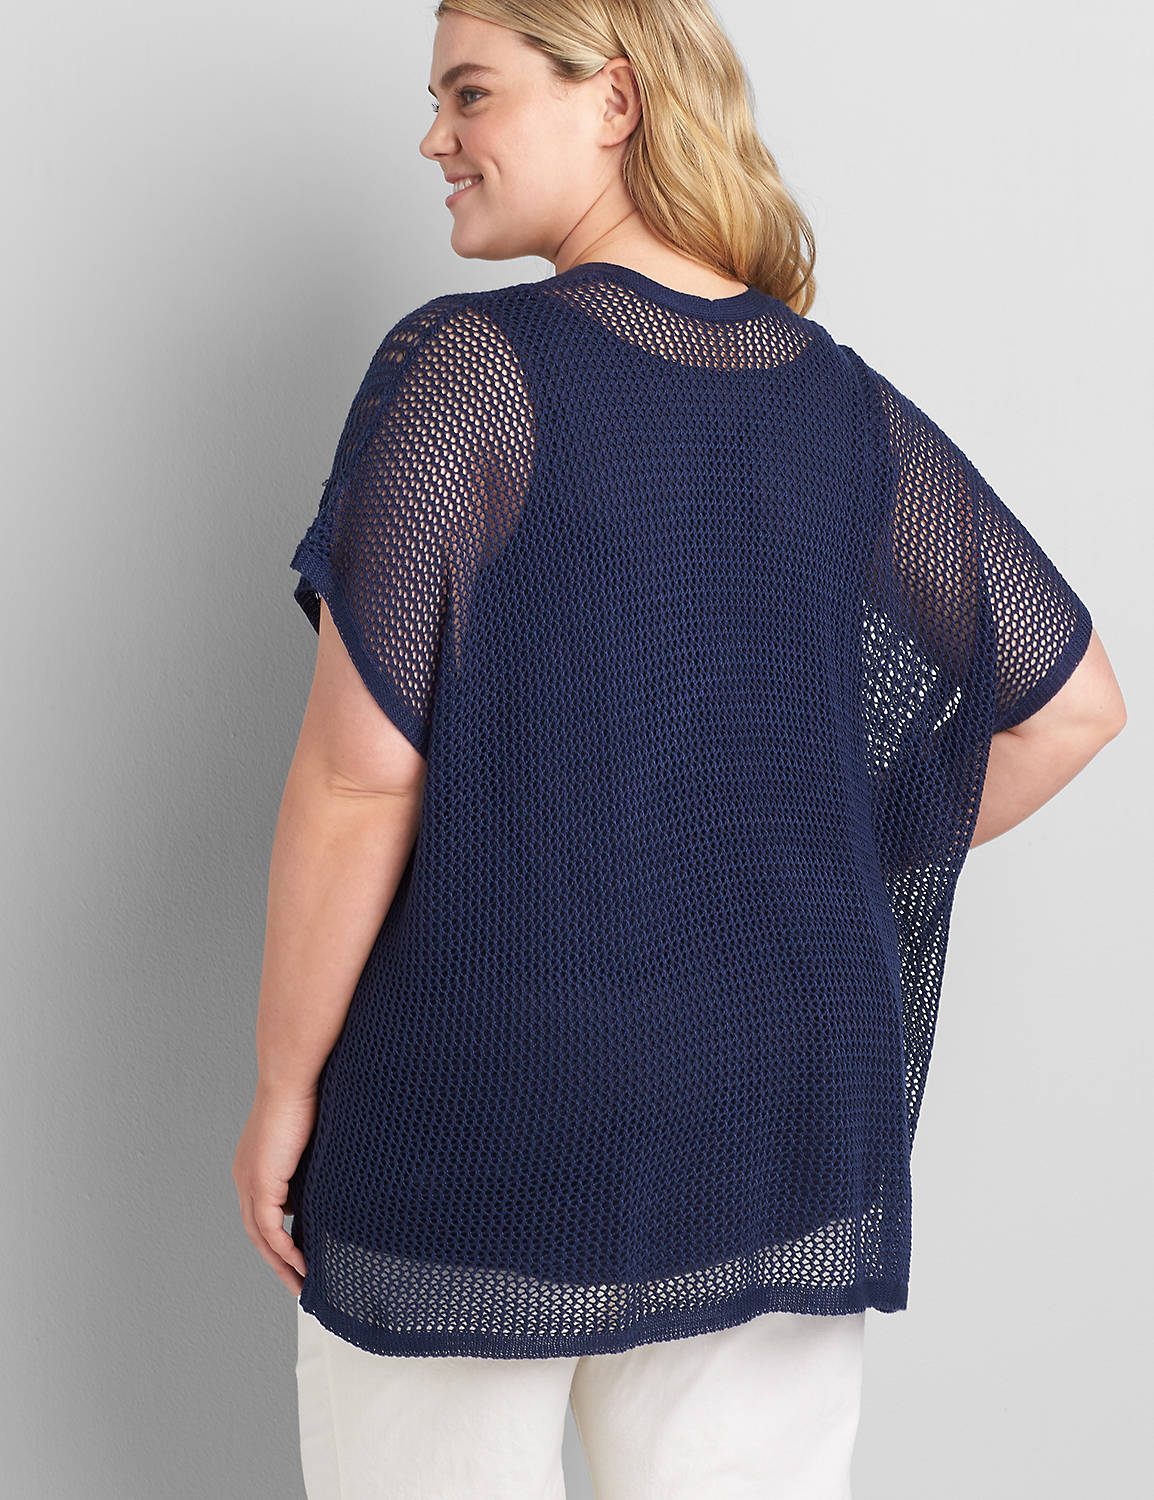 Open Front Mesh Stitch Overpiece 1121400:PANTONE Medieval Blue:14/20 Product Image 2